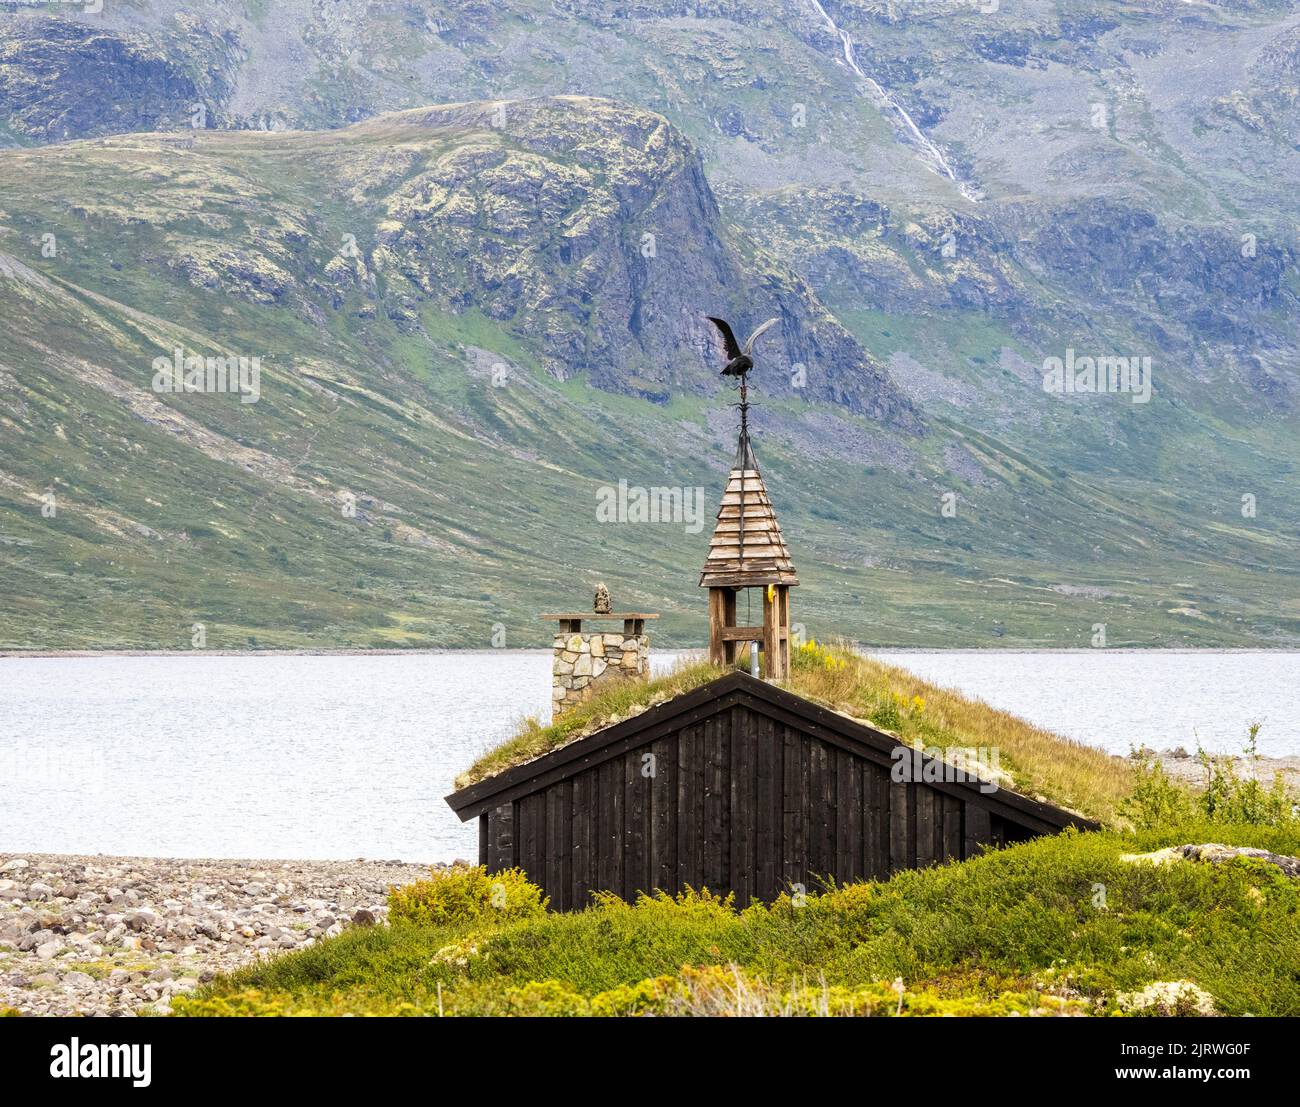 Belfry surmounted by a Sea Eagle on a building in the historic village at Eidsbugarden by Lake Bygdin -  Jotunheimen National Park Norway Stock Photo